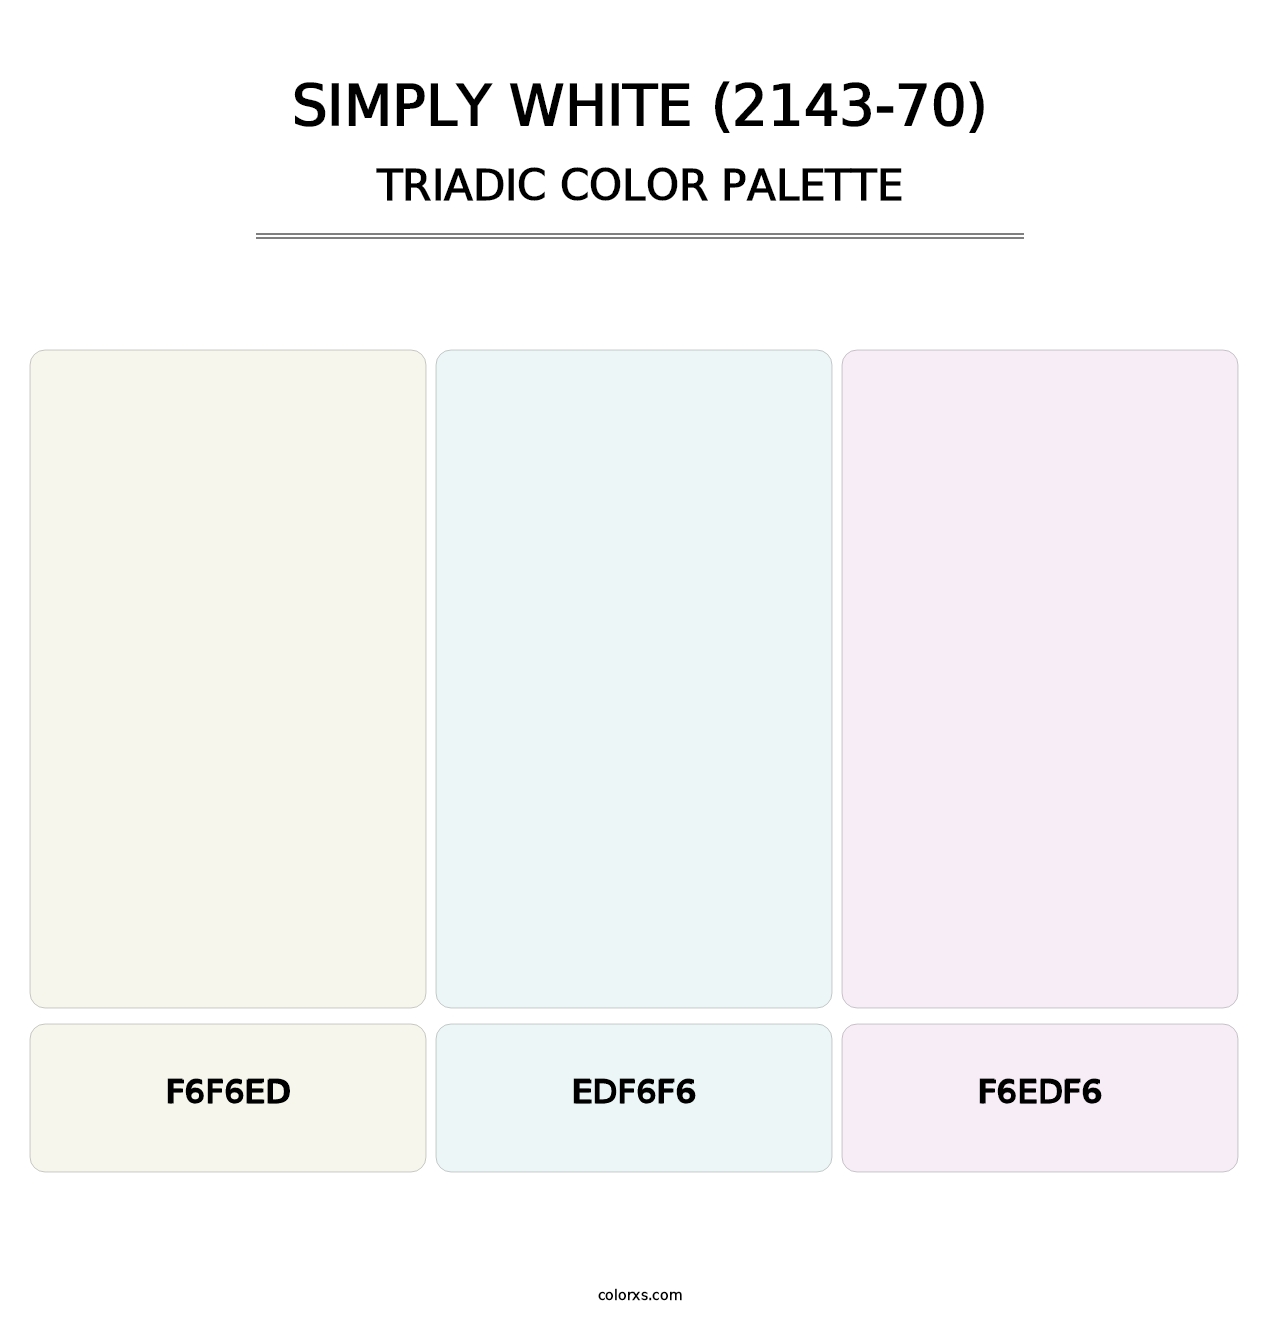 Simply White (2143-70) - Triadic Color Palette